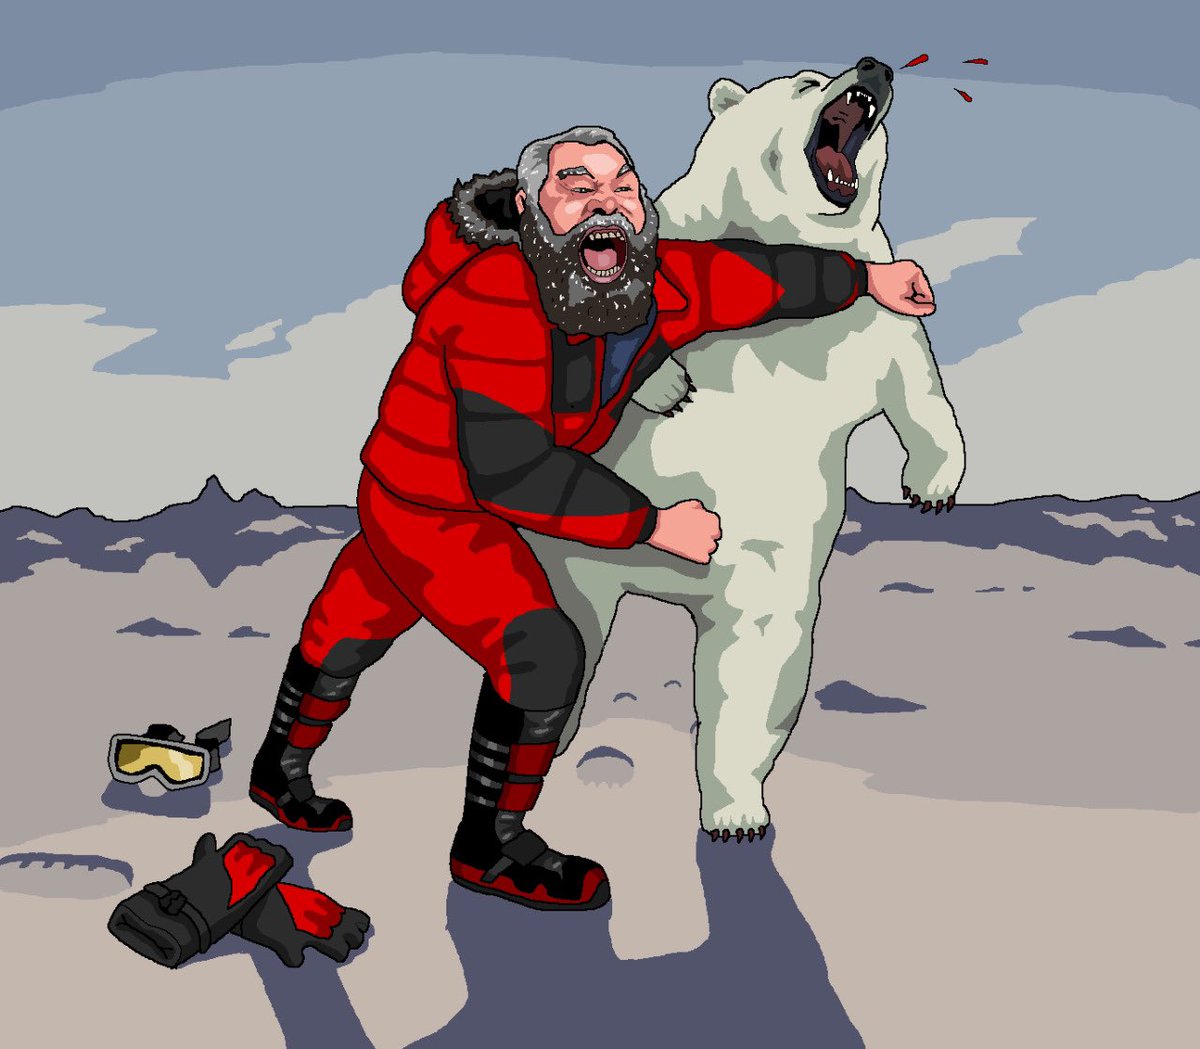 Another yet-to-premier film. So, here’s an artist’s interpretation of the time Brian Blessed punched a polar bear in the face.  #LFF  